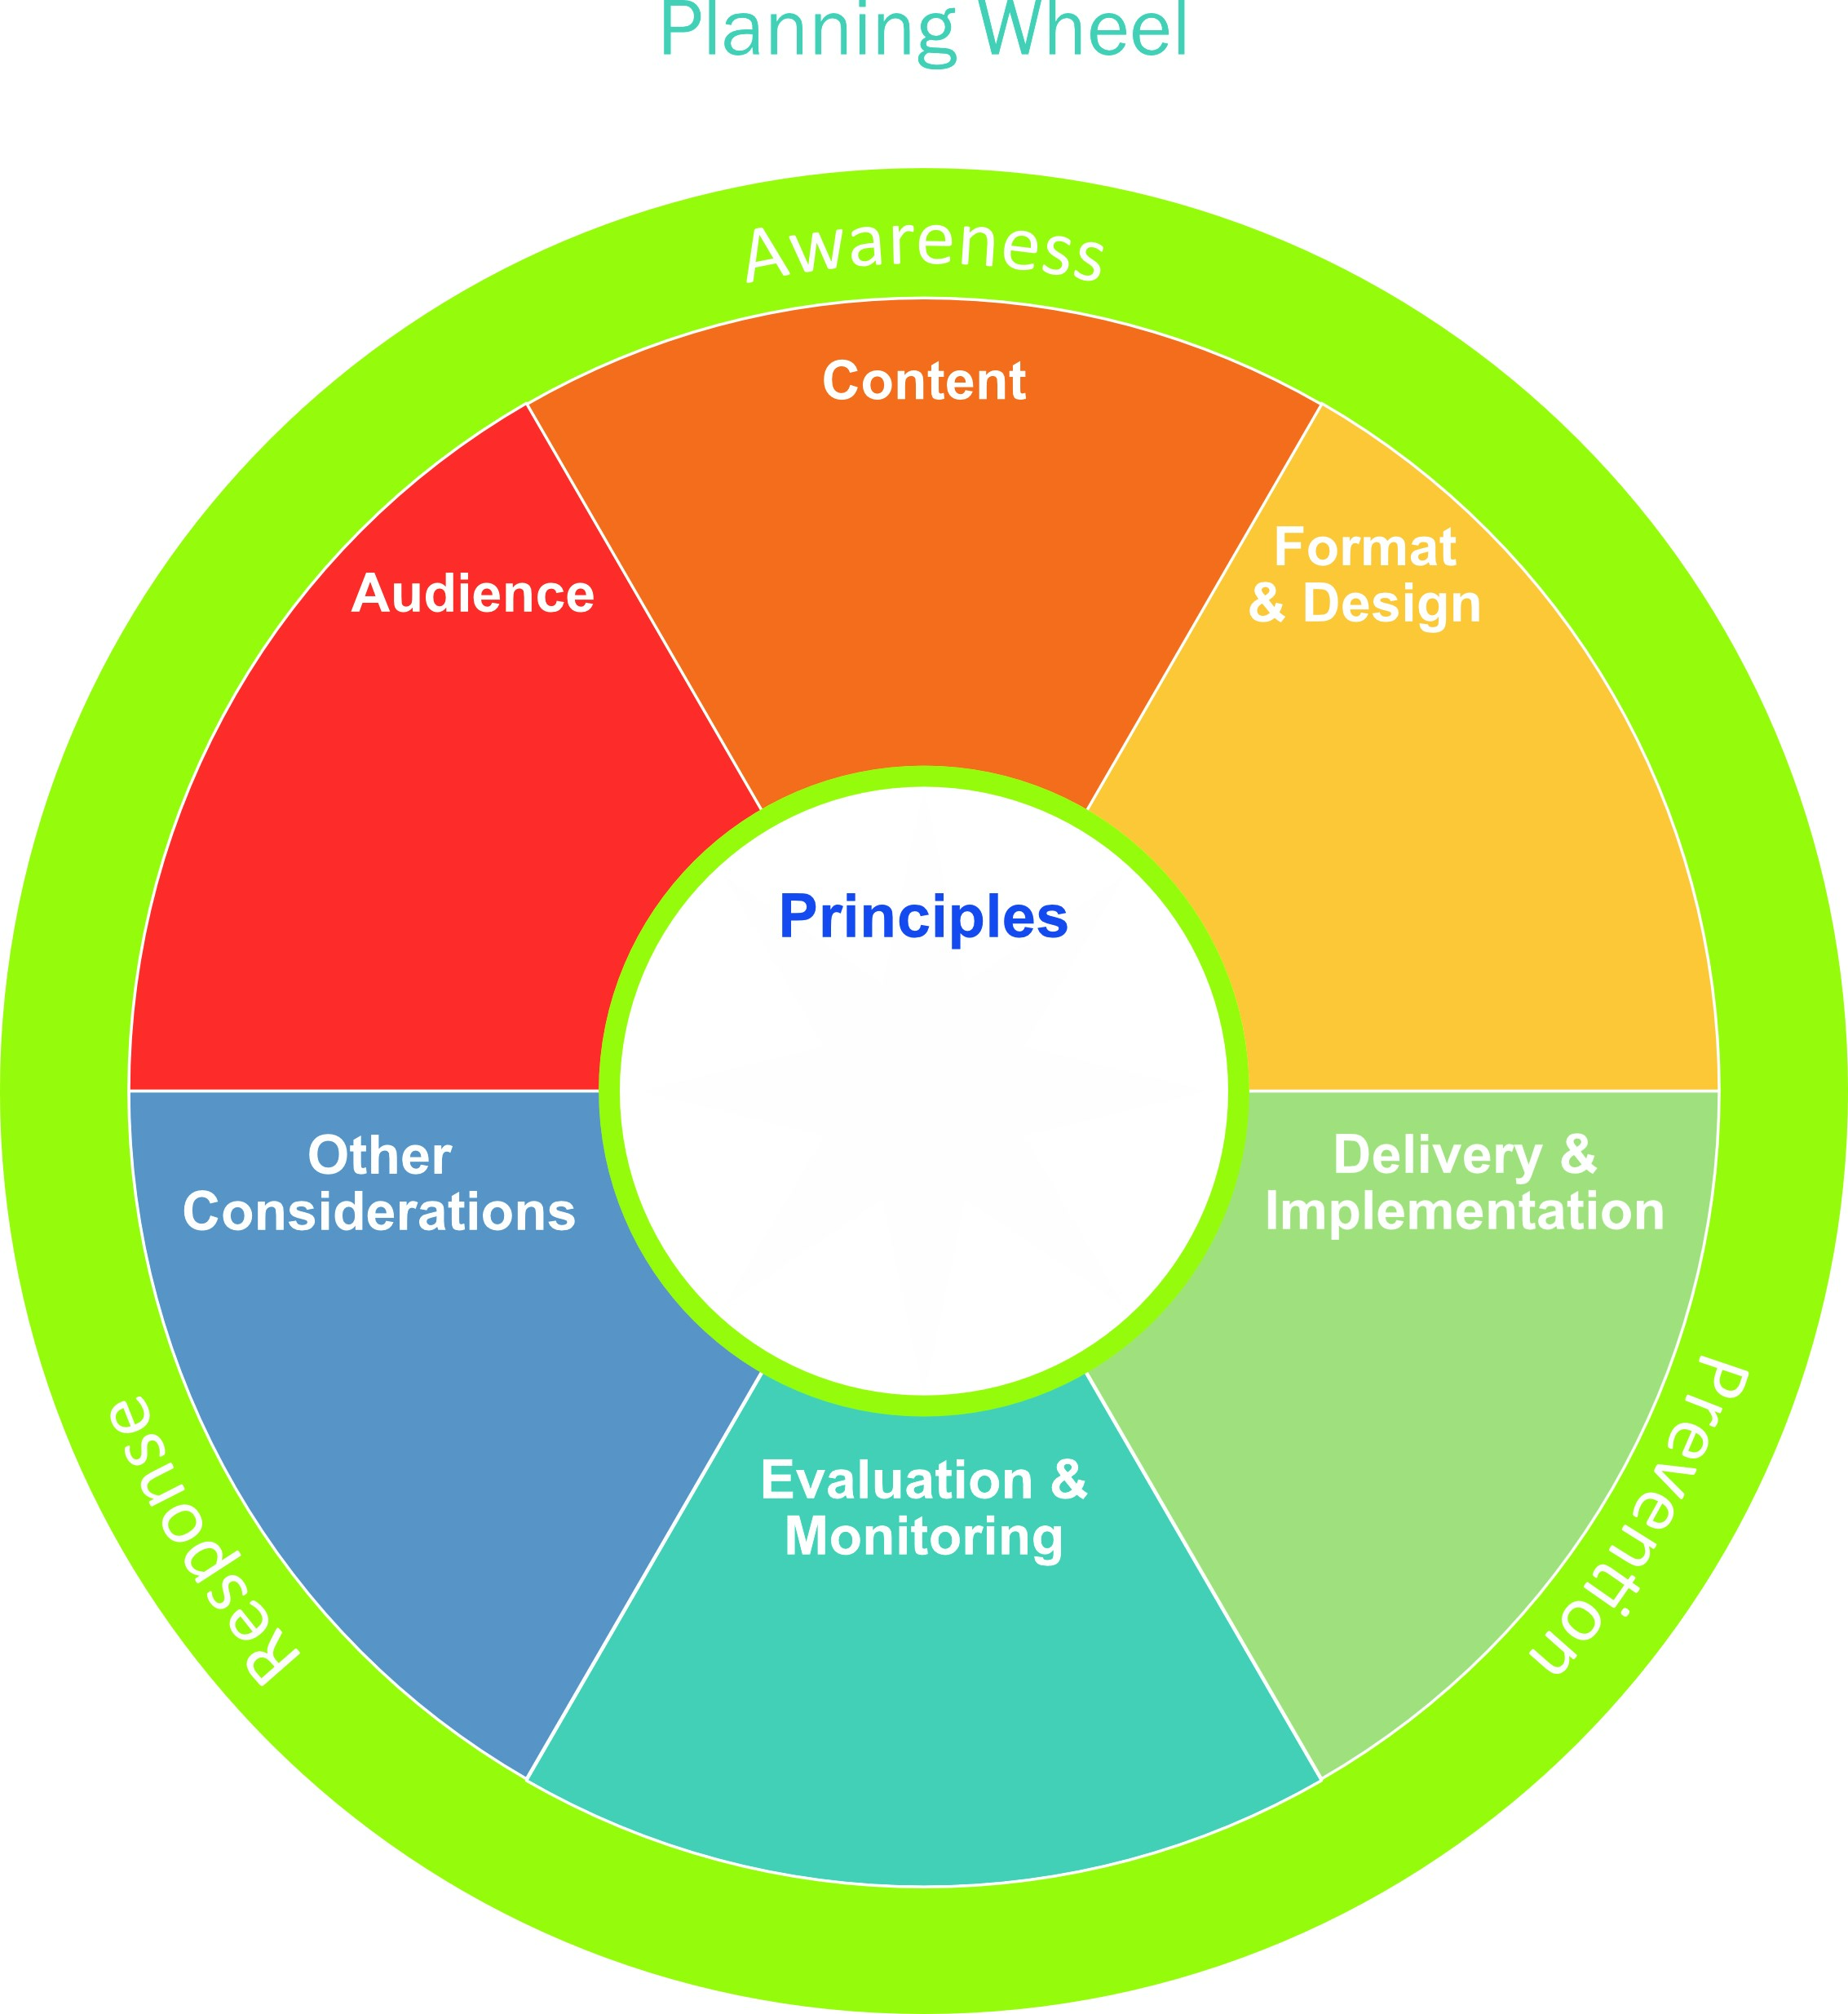 The planning wheel. Described in the text preceeding the image.